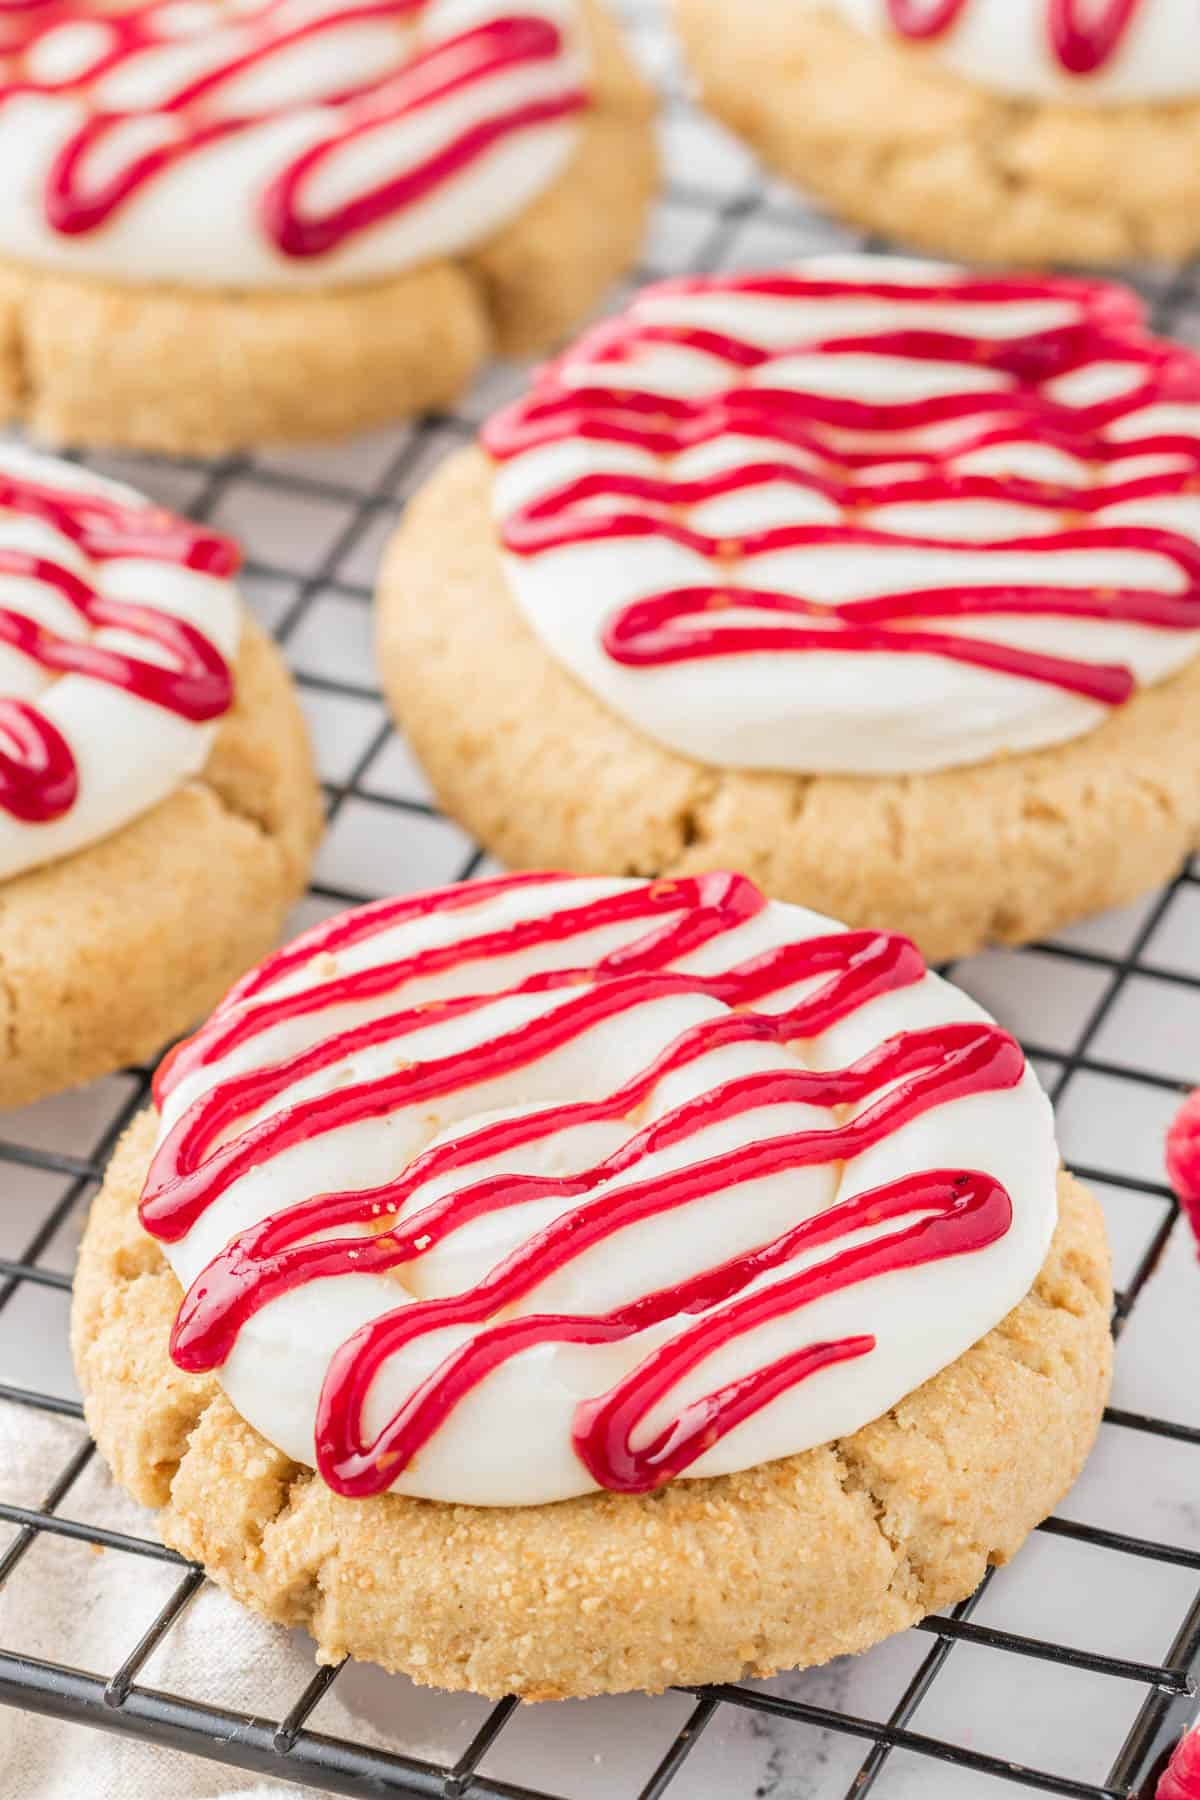 Graham cracker cookies with cream cheese frosting and raspberry drizzle.